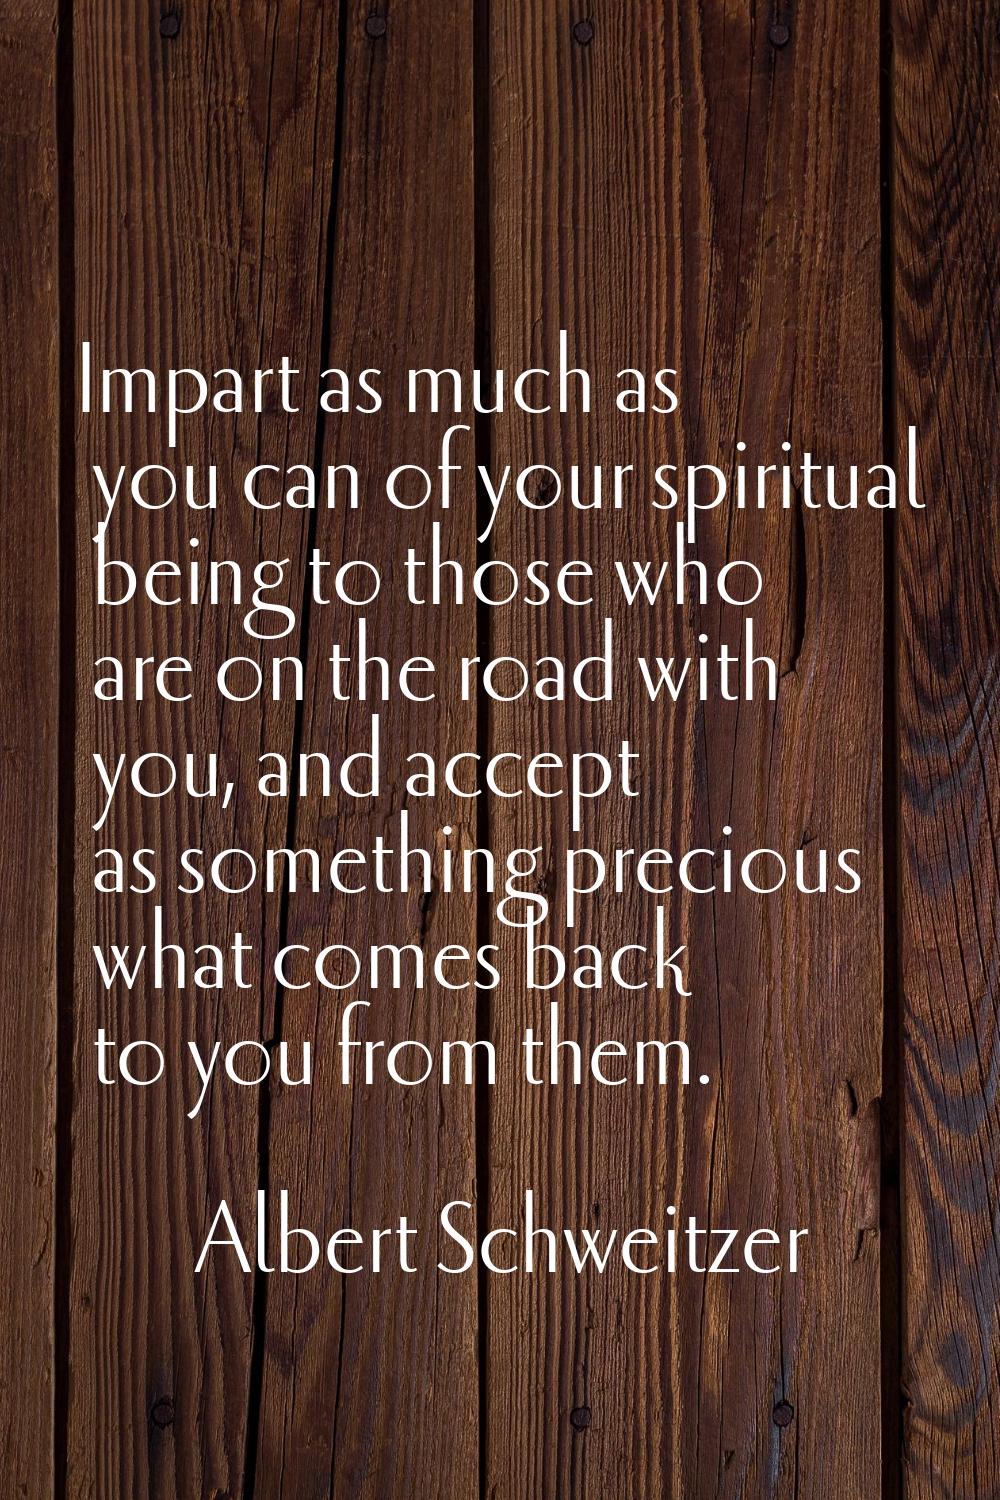 Impart as much as you can of your spiritual being to those who are on the road with you, and accept